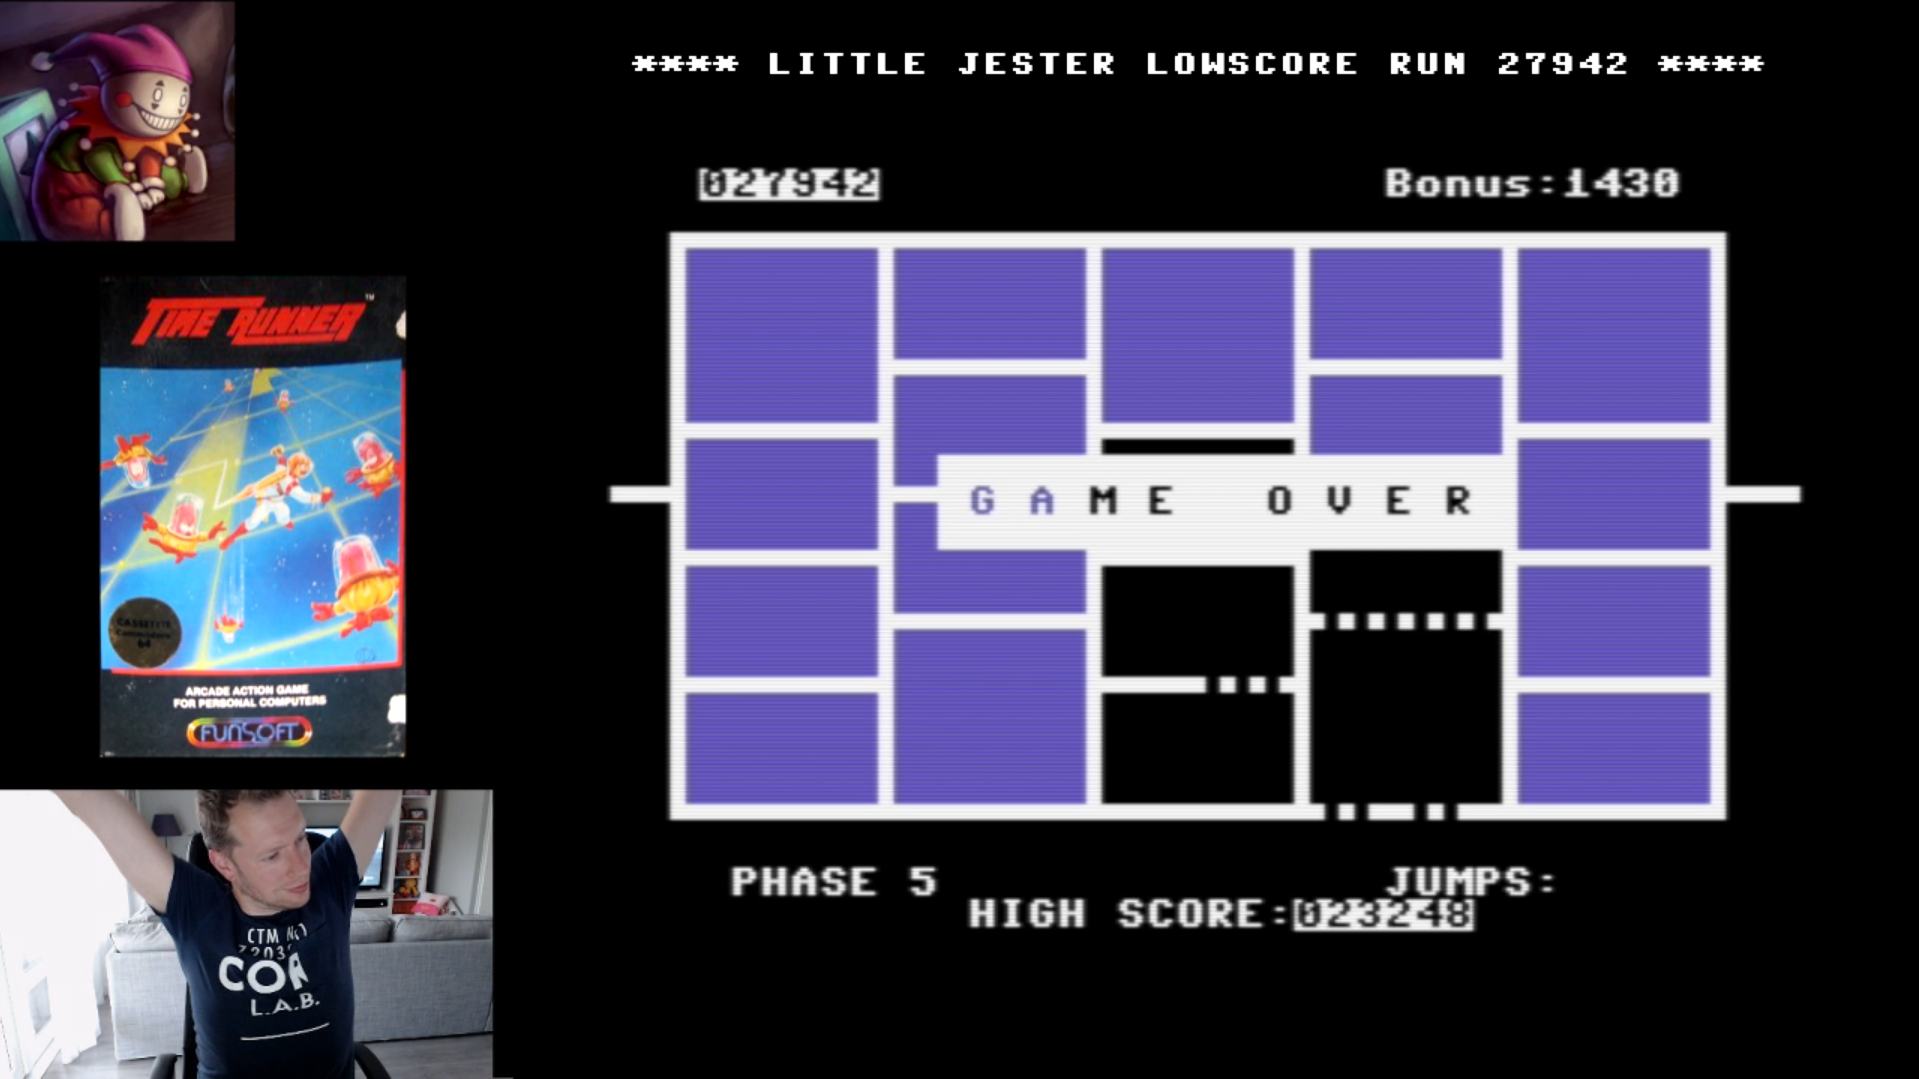 LittleJester: Time Runner (Commodore 64 Emulated) 27,942 points on 2018-05-27 11:32:03